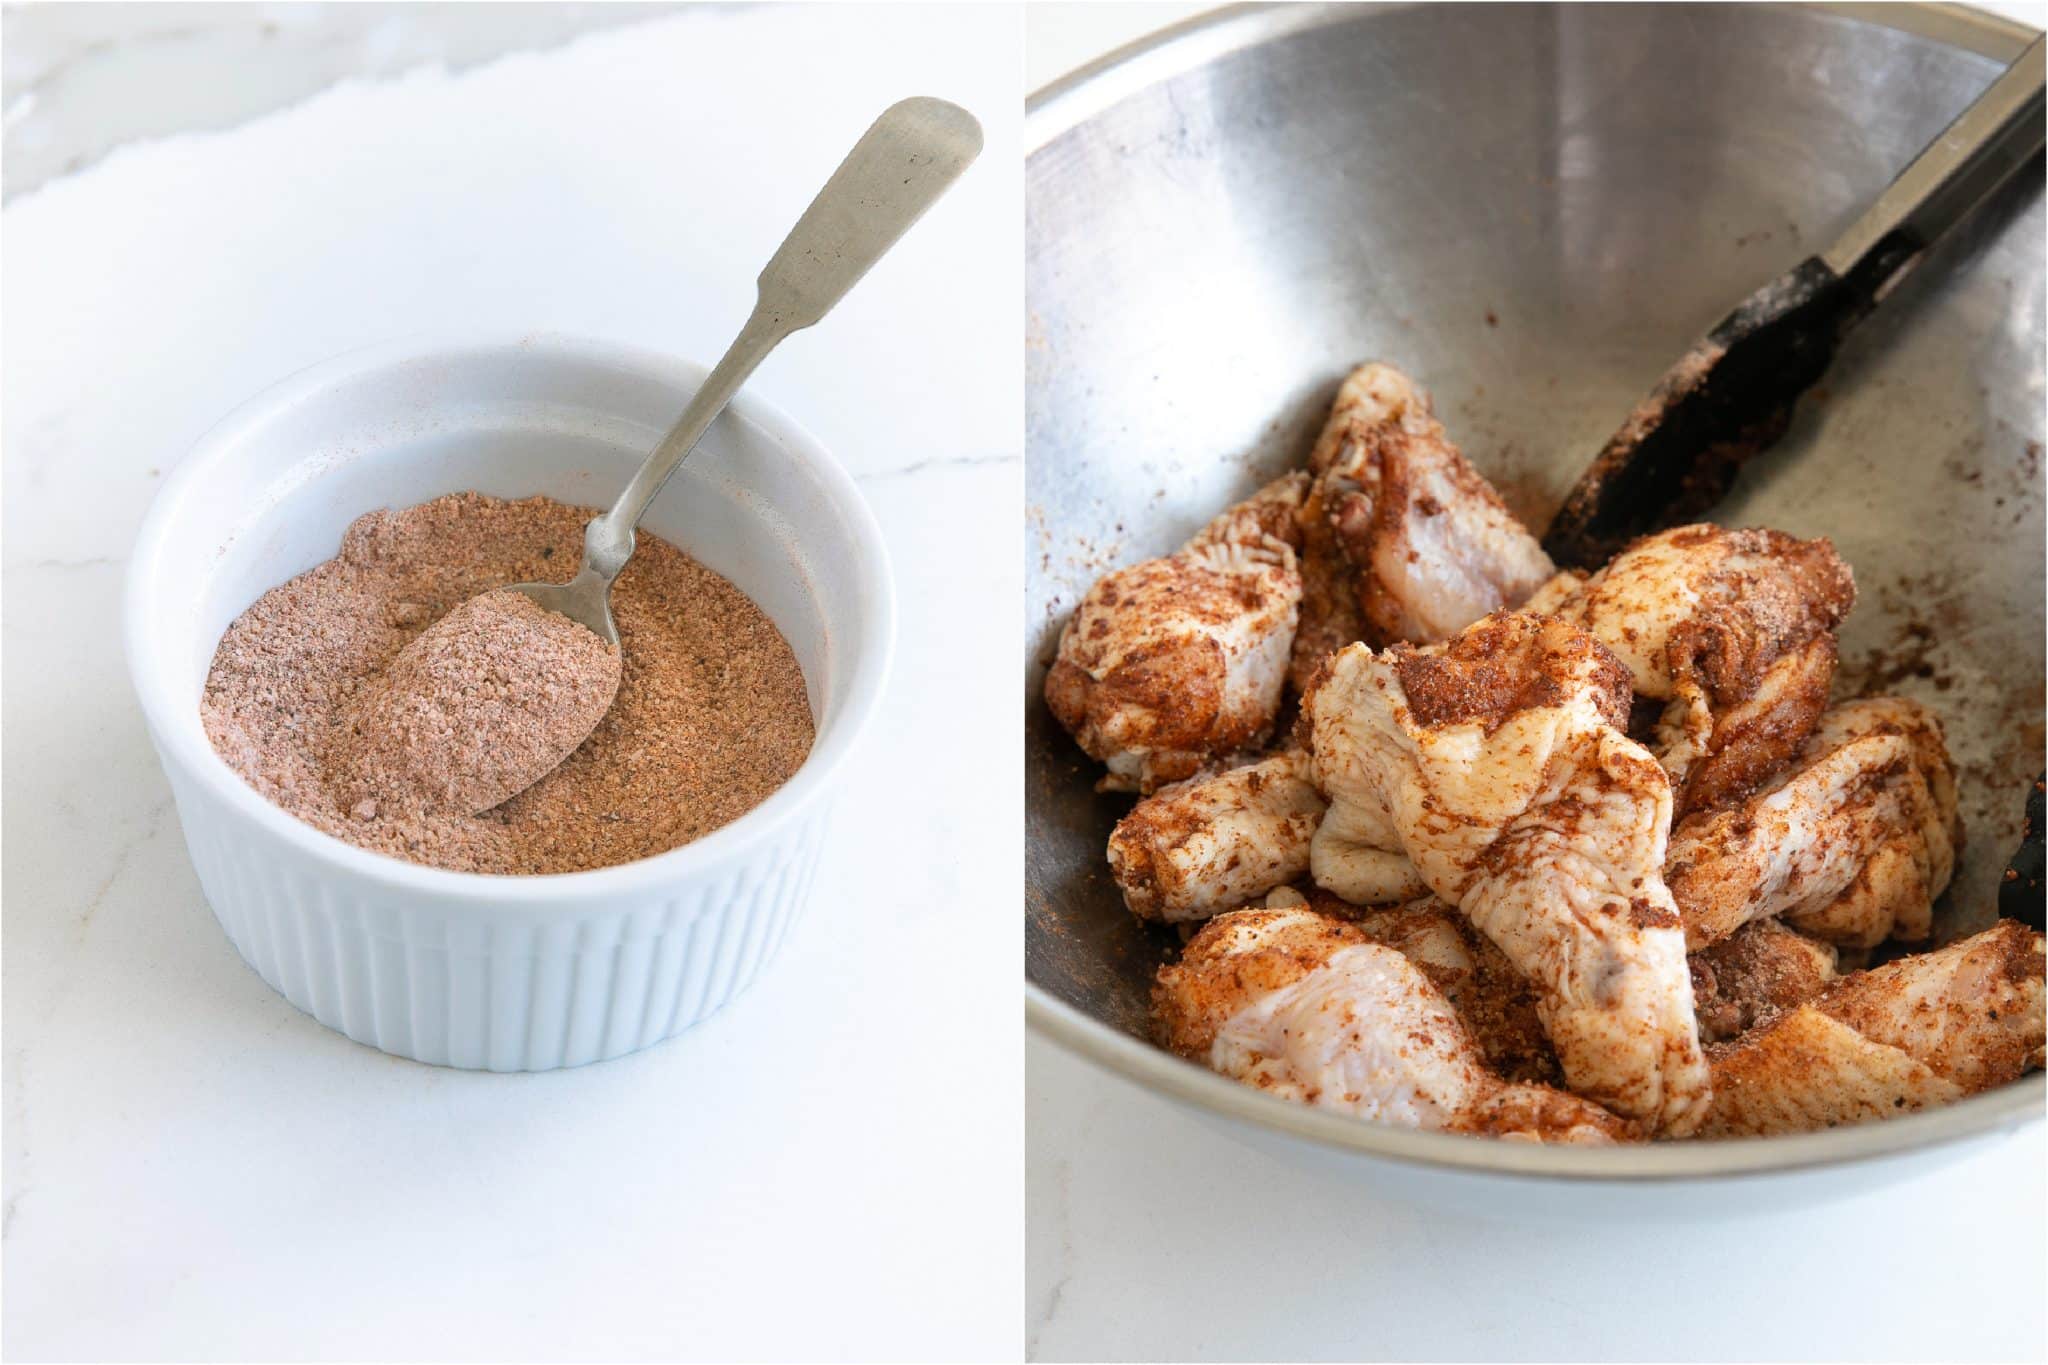 Two image collage- image on the left shows a small white bowl filled with homemade dry rub for chicken wings while the image on the right shows chicken wings in a mixing bowl covered with seasoning.